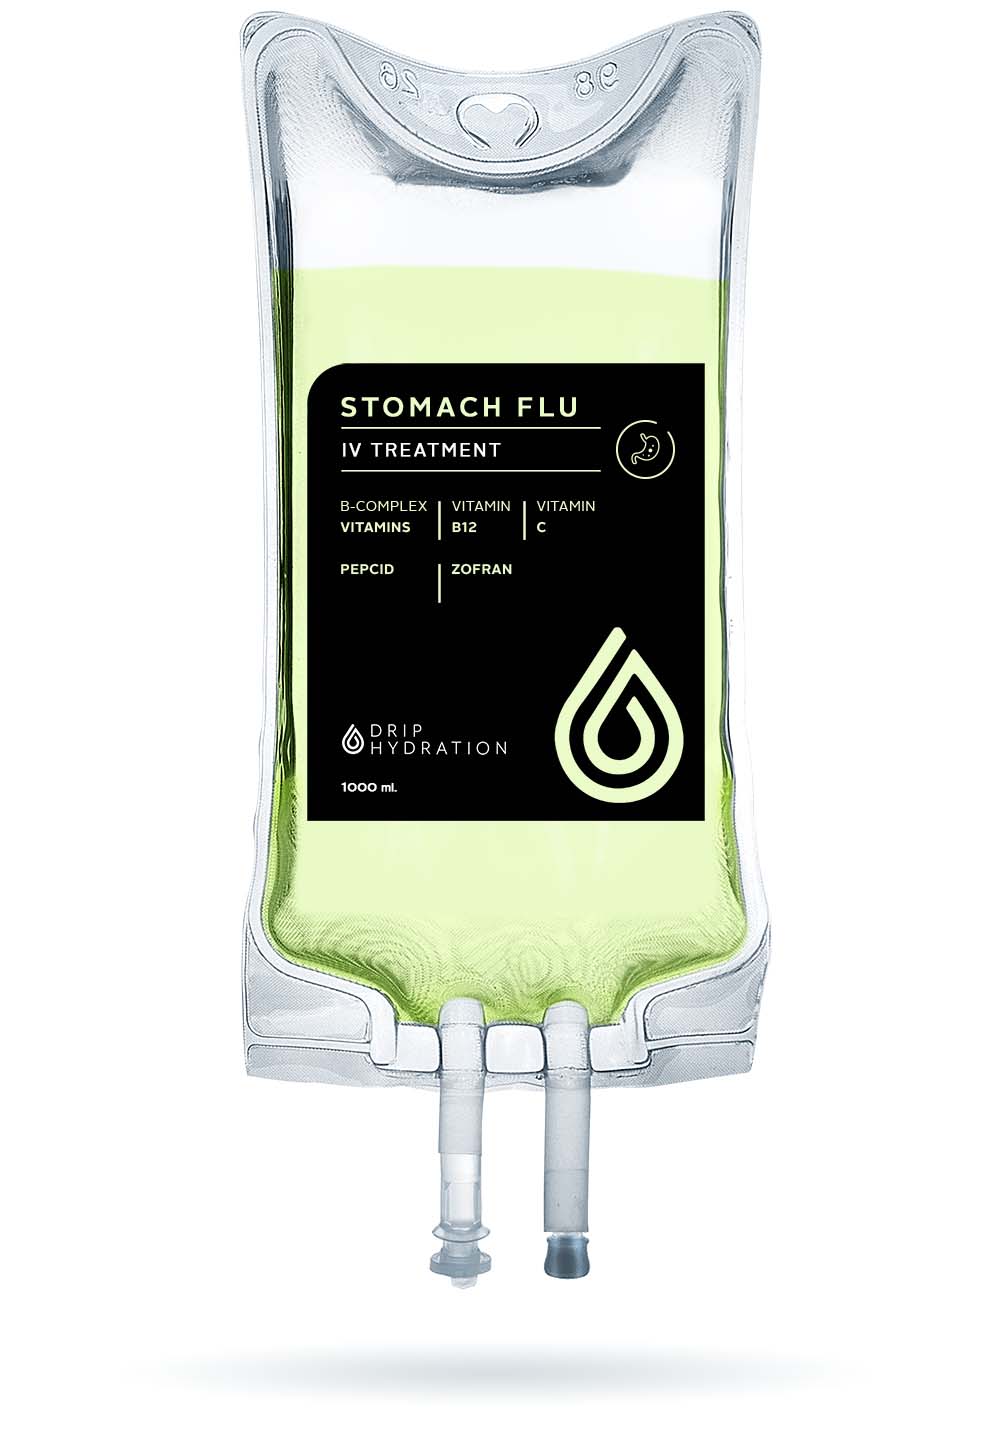 infusion bag named Stomach Flu linking toward the service page